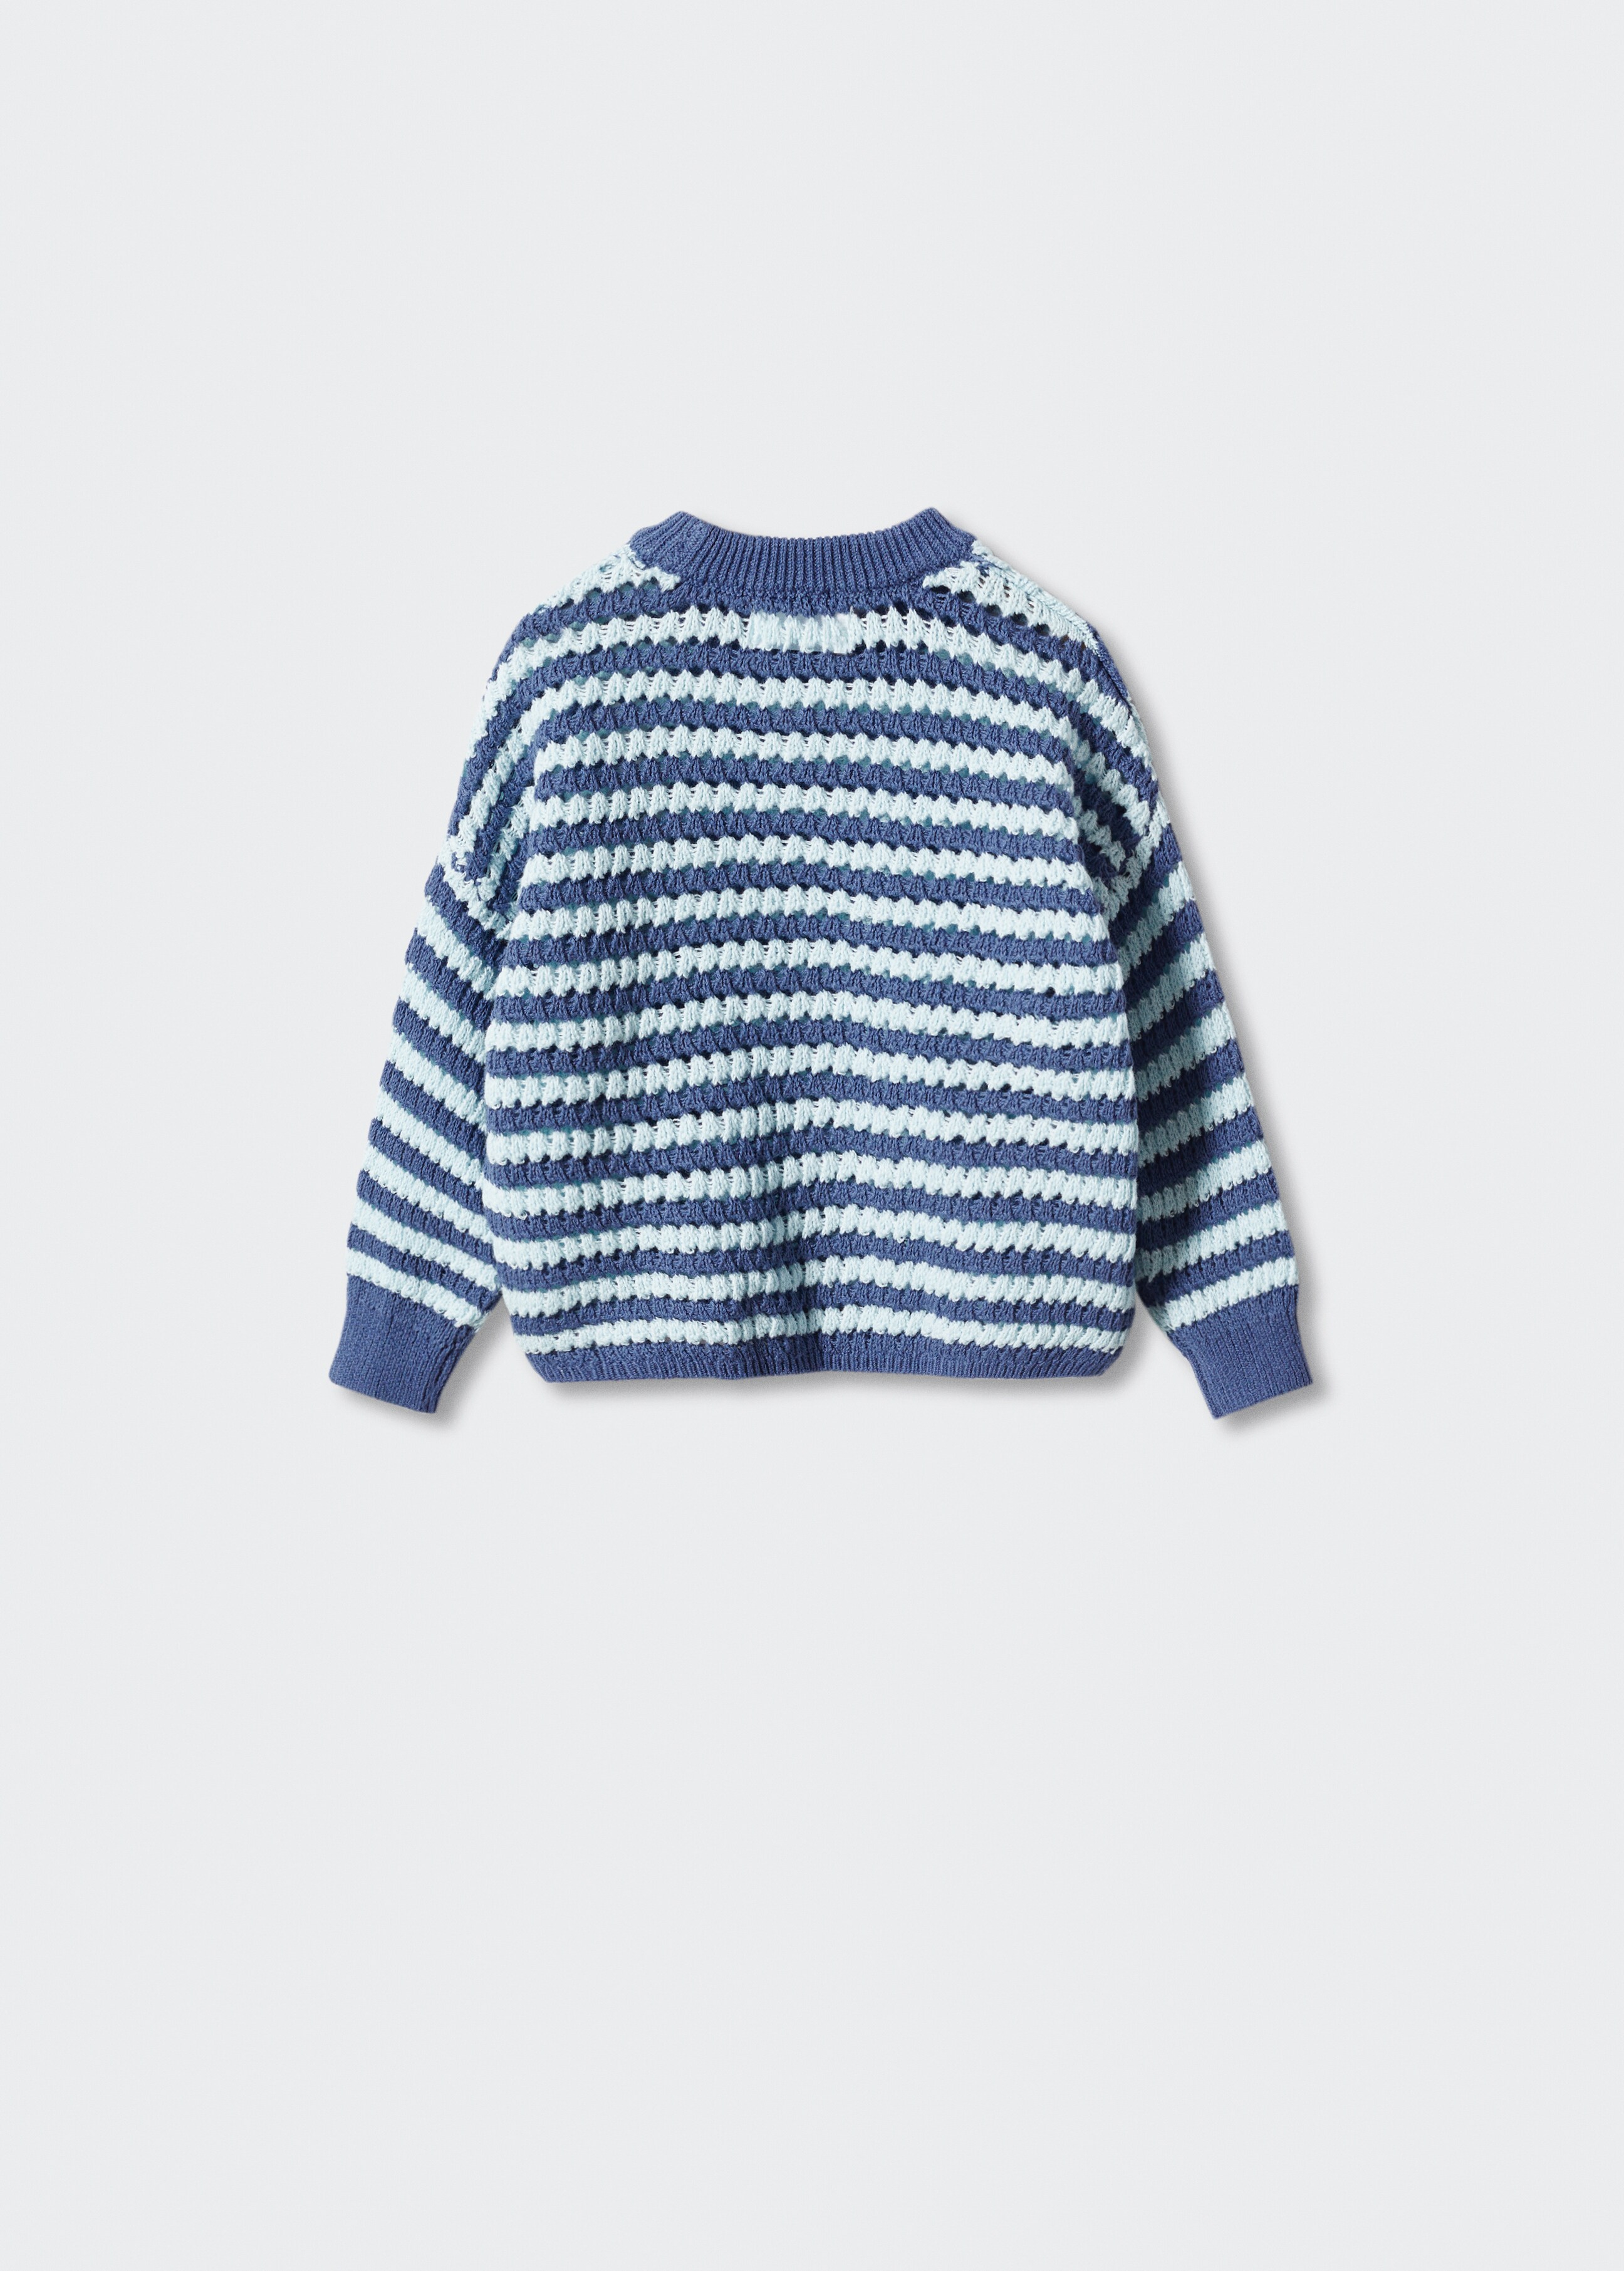 Striped openwork knit sweater - Reverse of the article